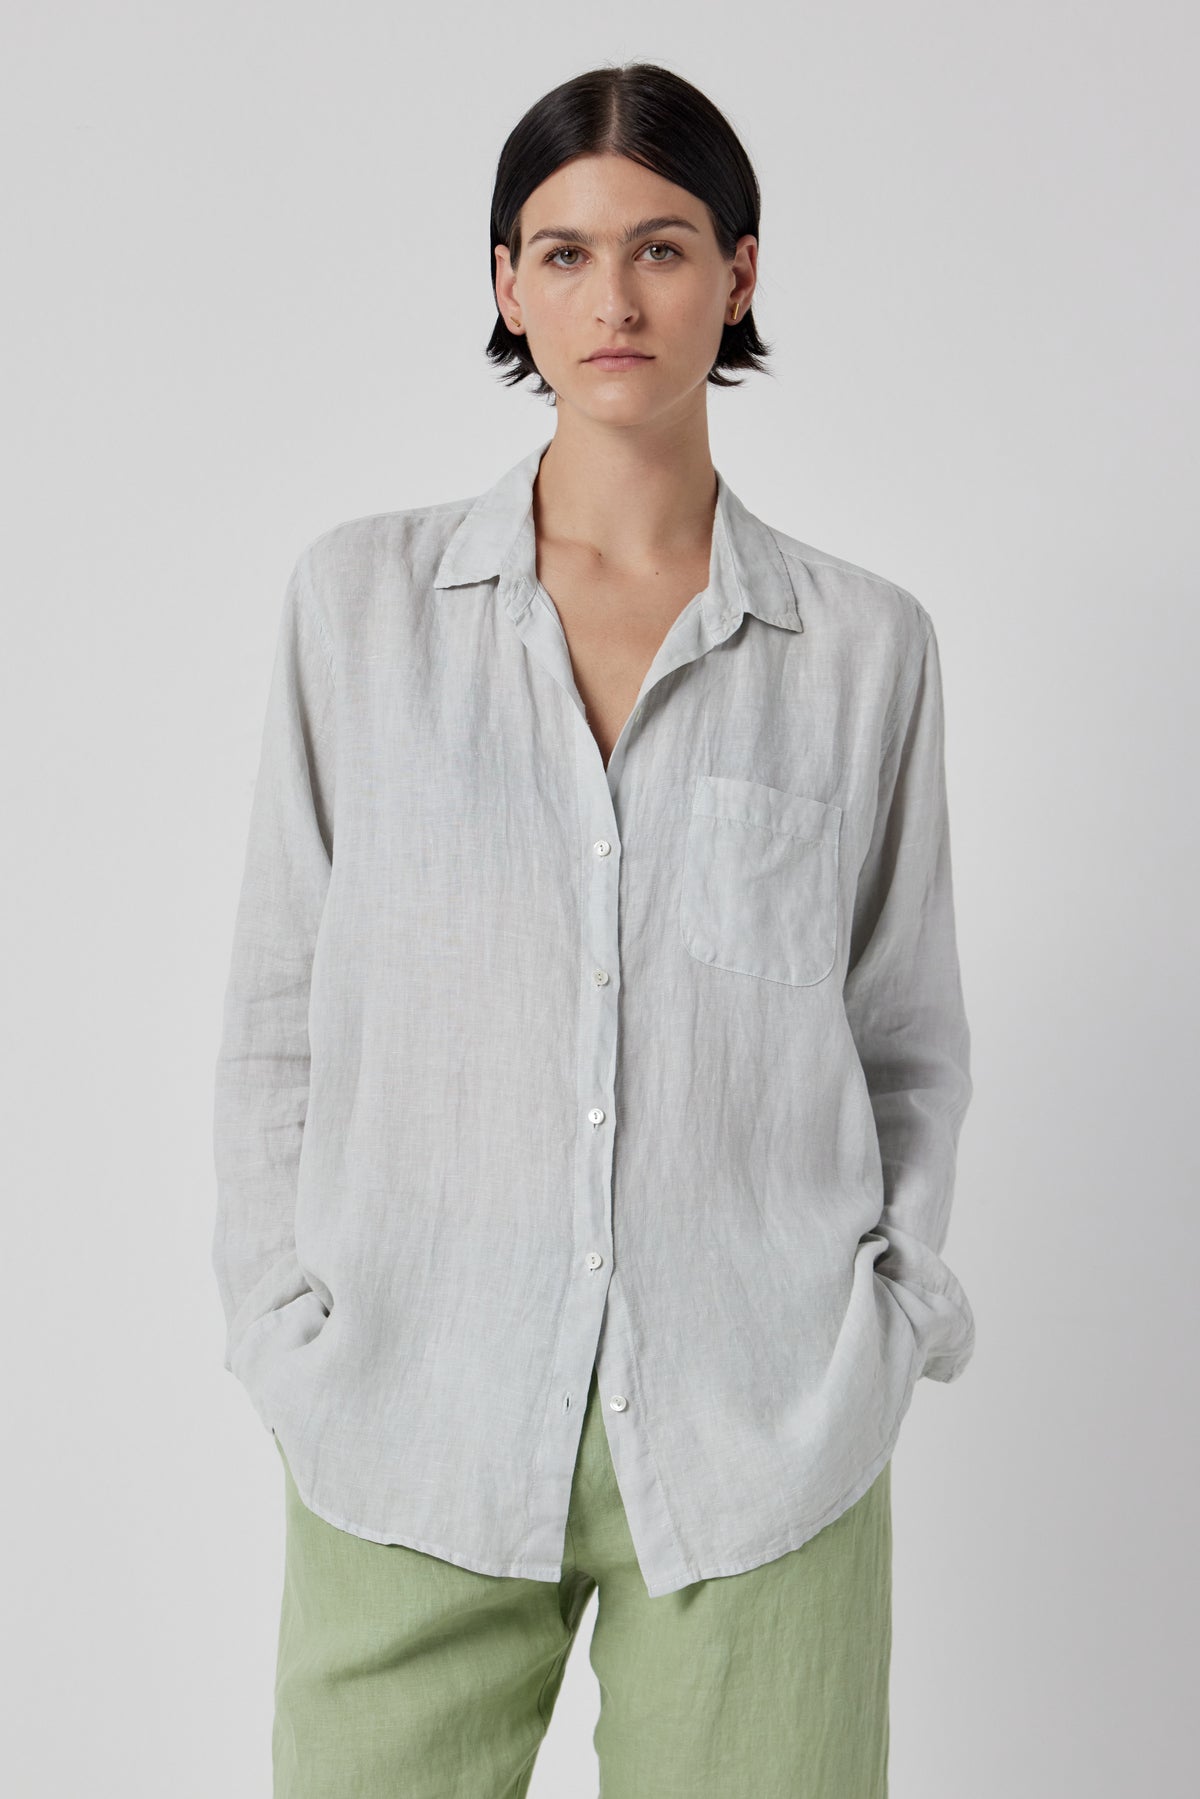 A person with short dark hair wearing a Velvet by Jenny Graham MULHOLLAND LINEN SHIRT in light gray with a scooped hemline and light green pants stands against a plain white background.-36212529660097